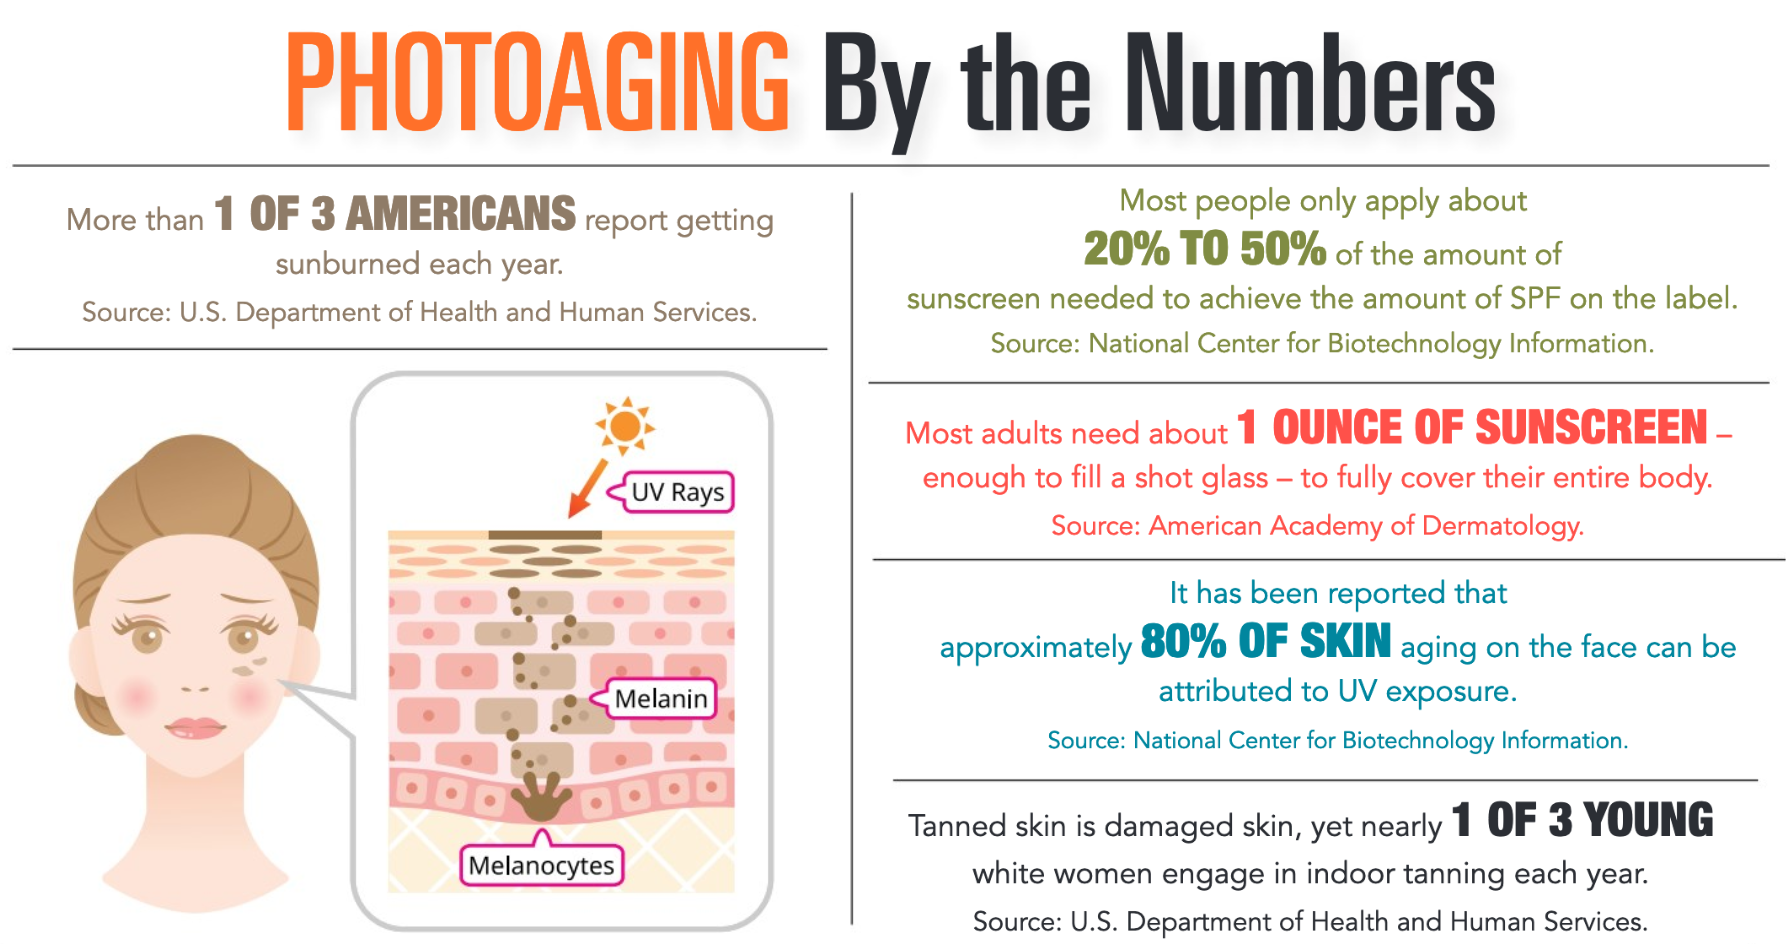 INFOGRAPHIC-photoaging-by-the-numbers